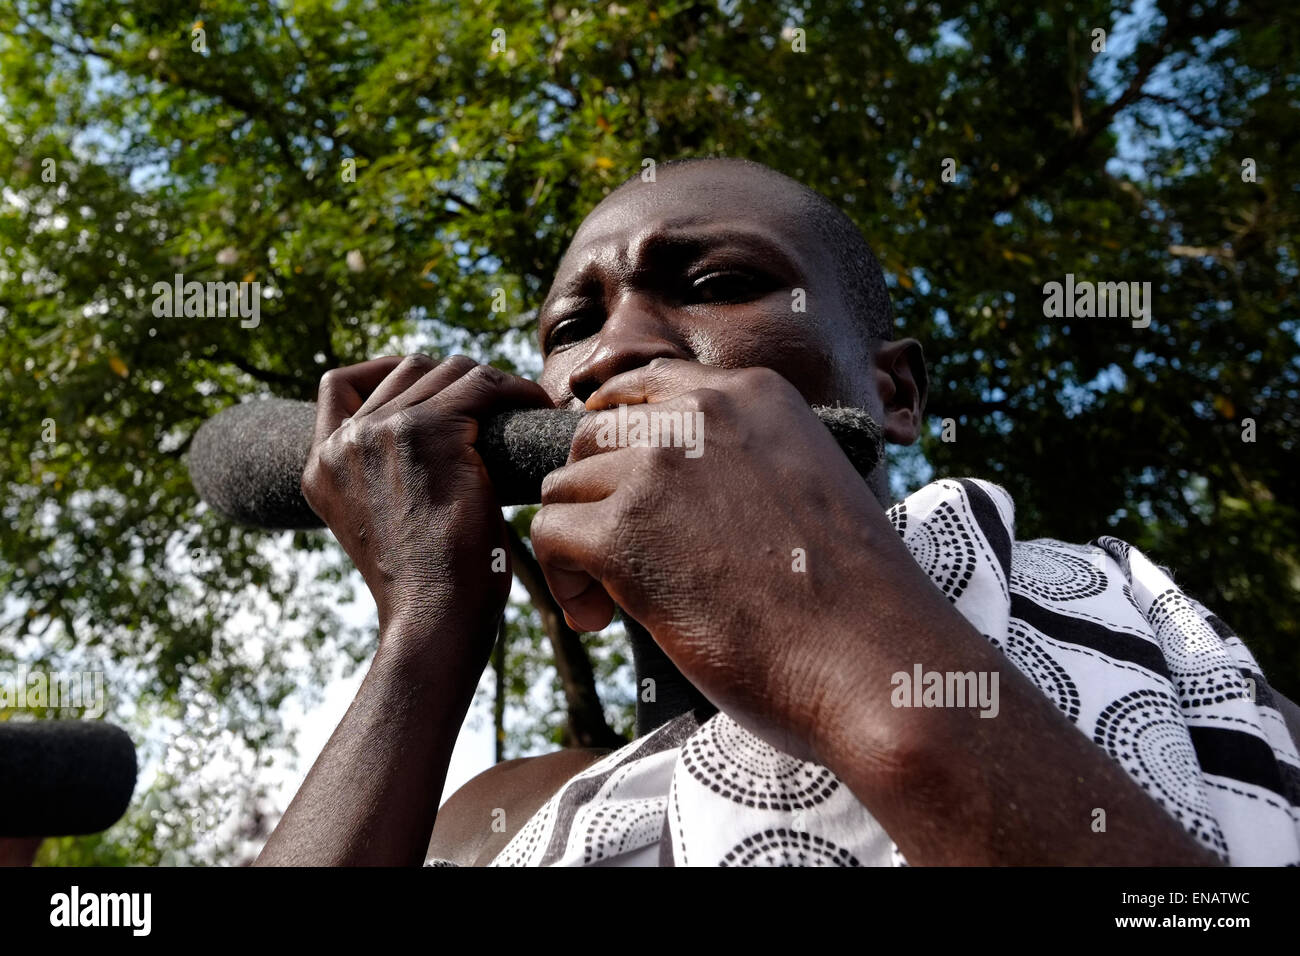 A local man playing a traditional wooden flute in Ghana Africa Stock Photo